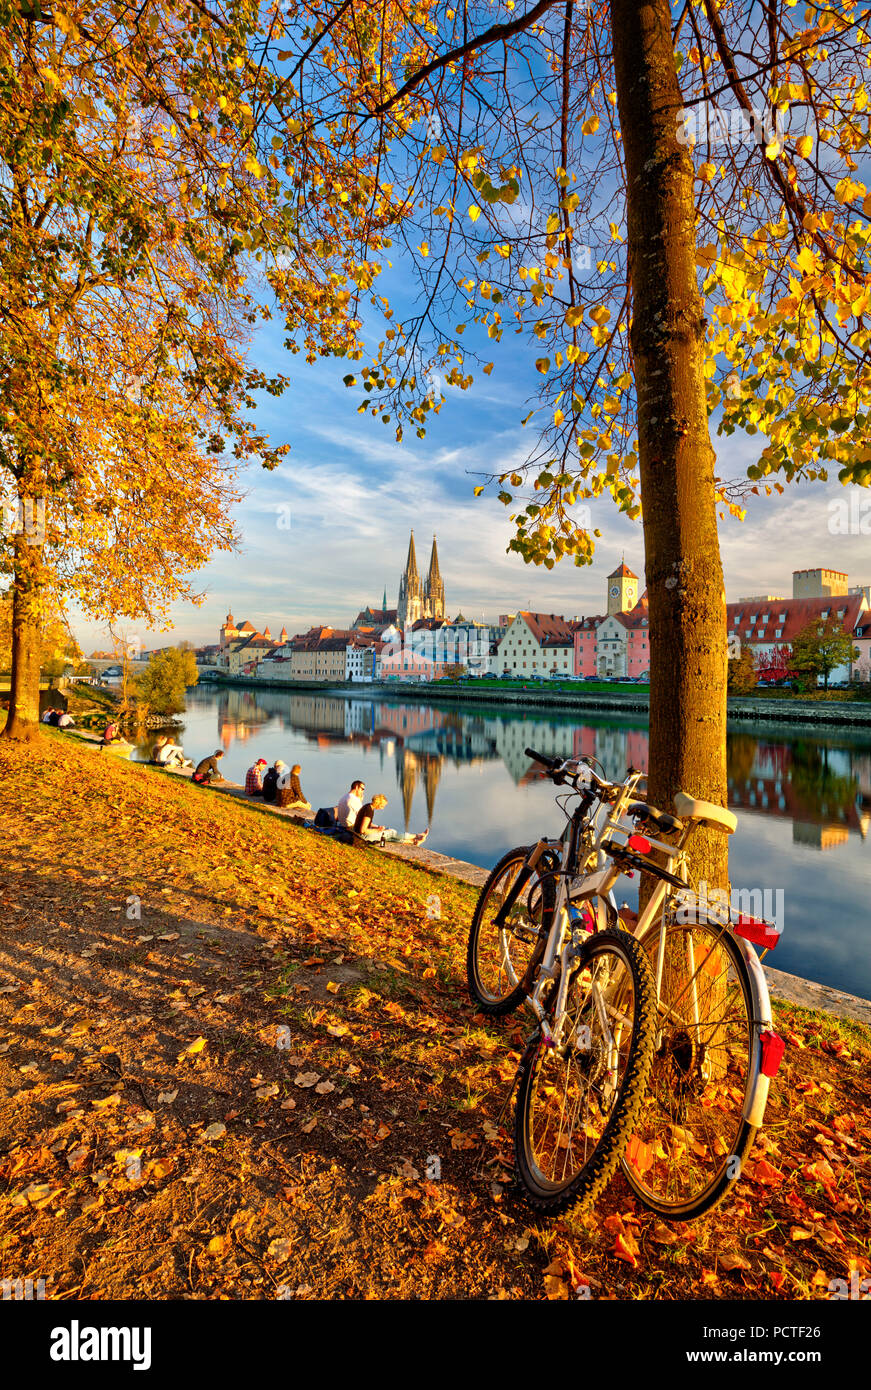 View from the Jahn Island, cathedral, waterfront, autumn, Regensburg, Upper Palatinate, Bavaria, Germany, Europe, Stock Photo